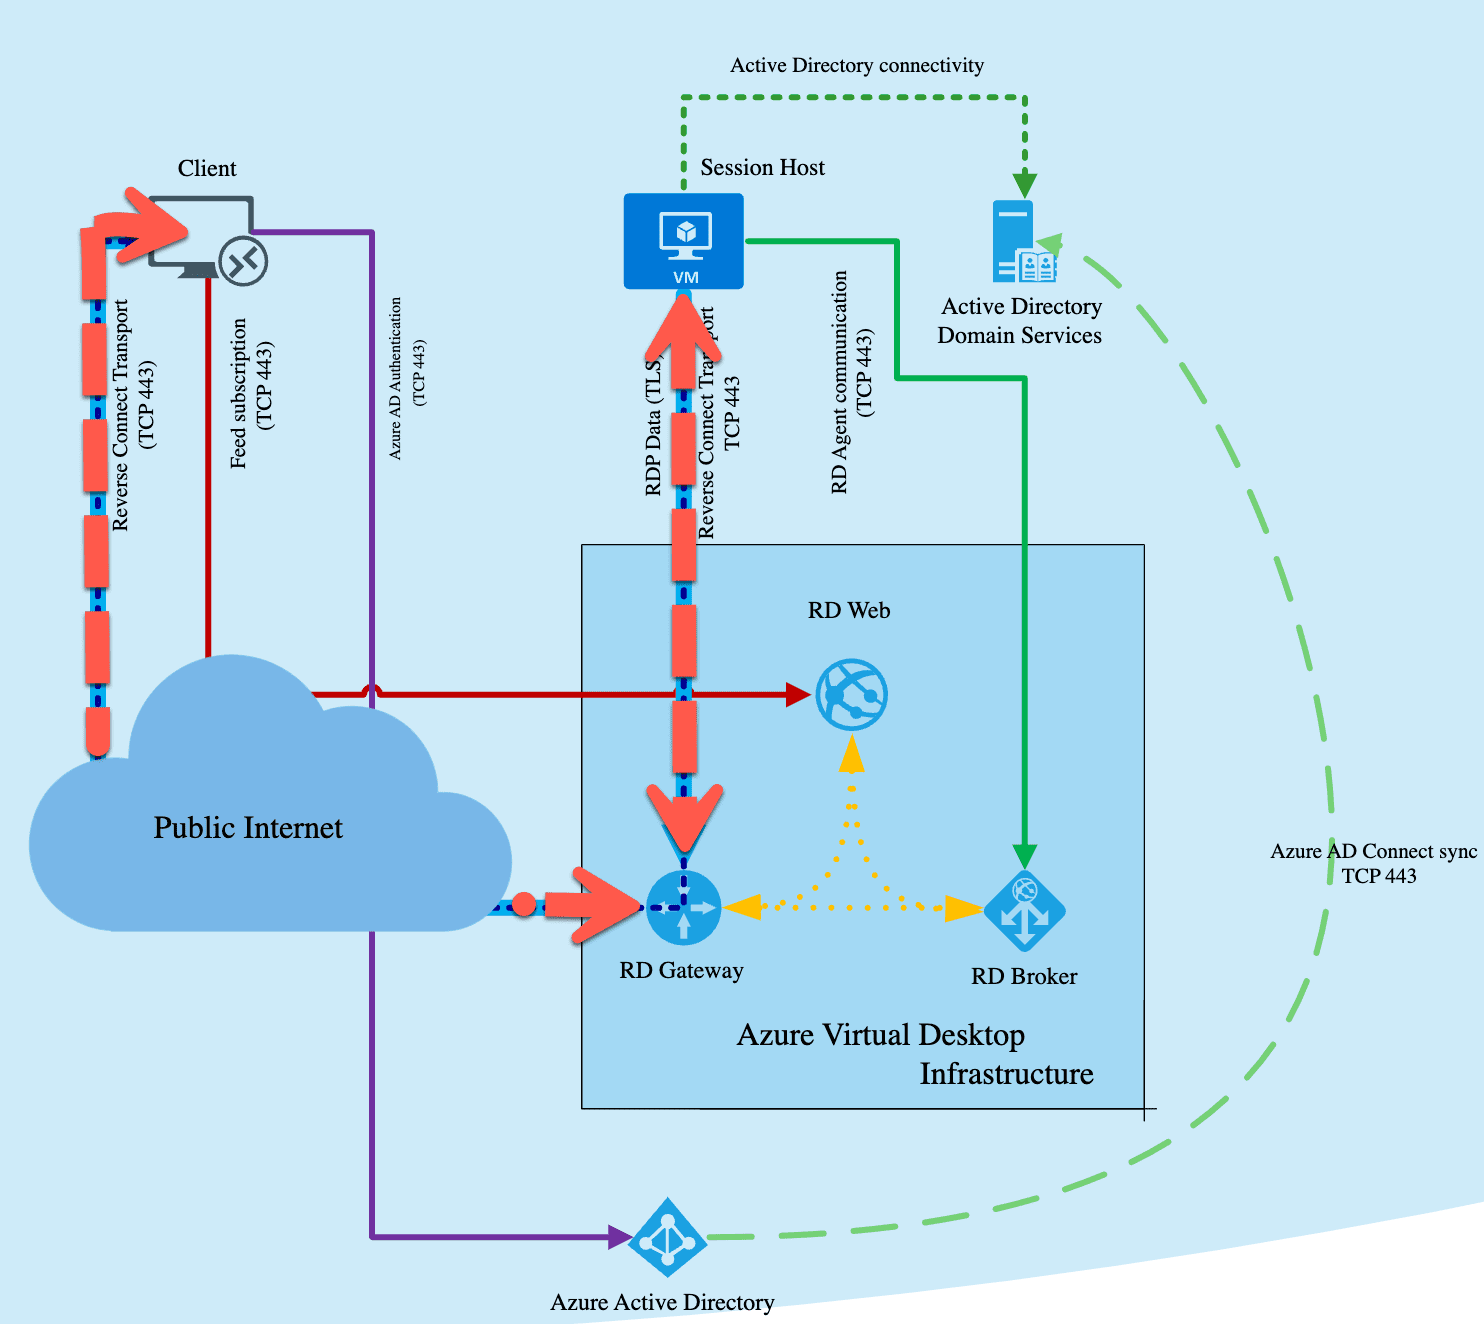 reverse connect which creates a TCP outbound connection to your client through the AVD gateway